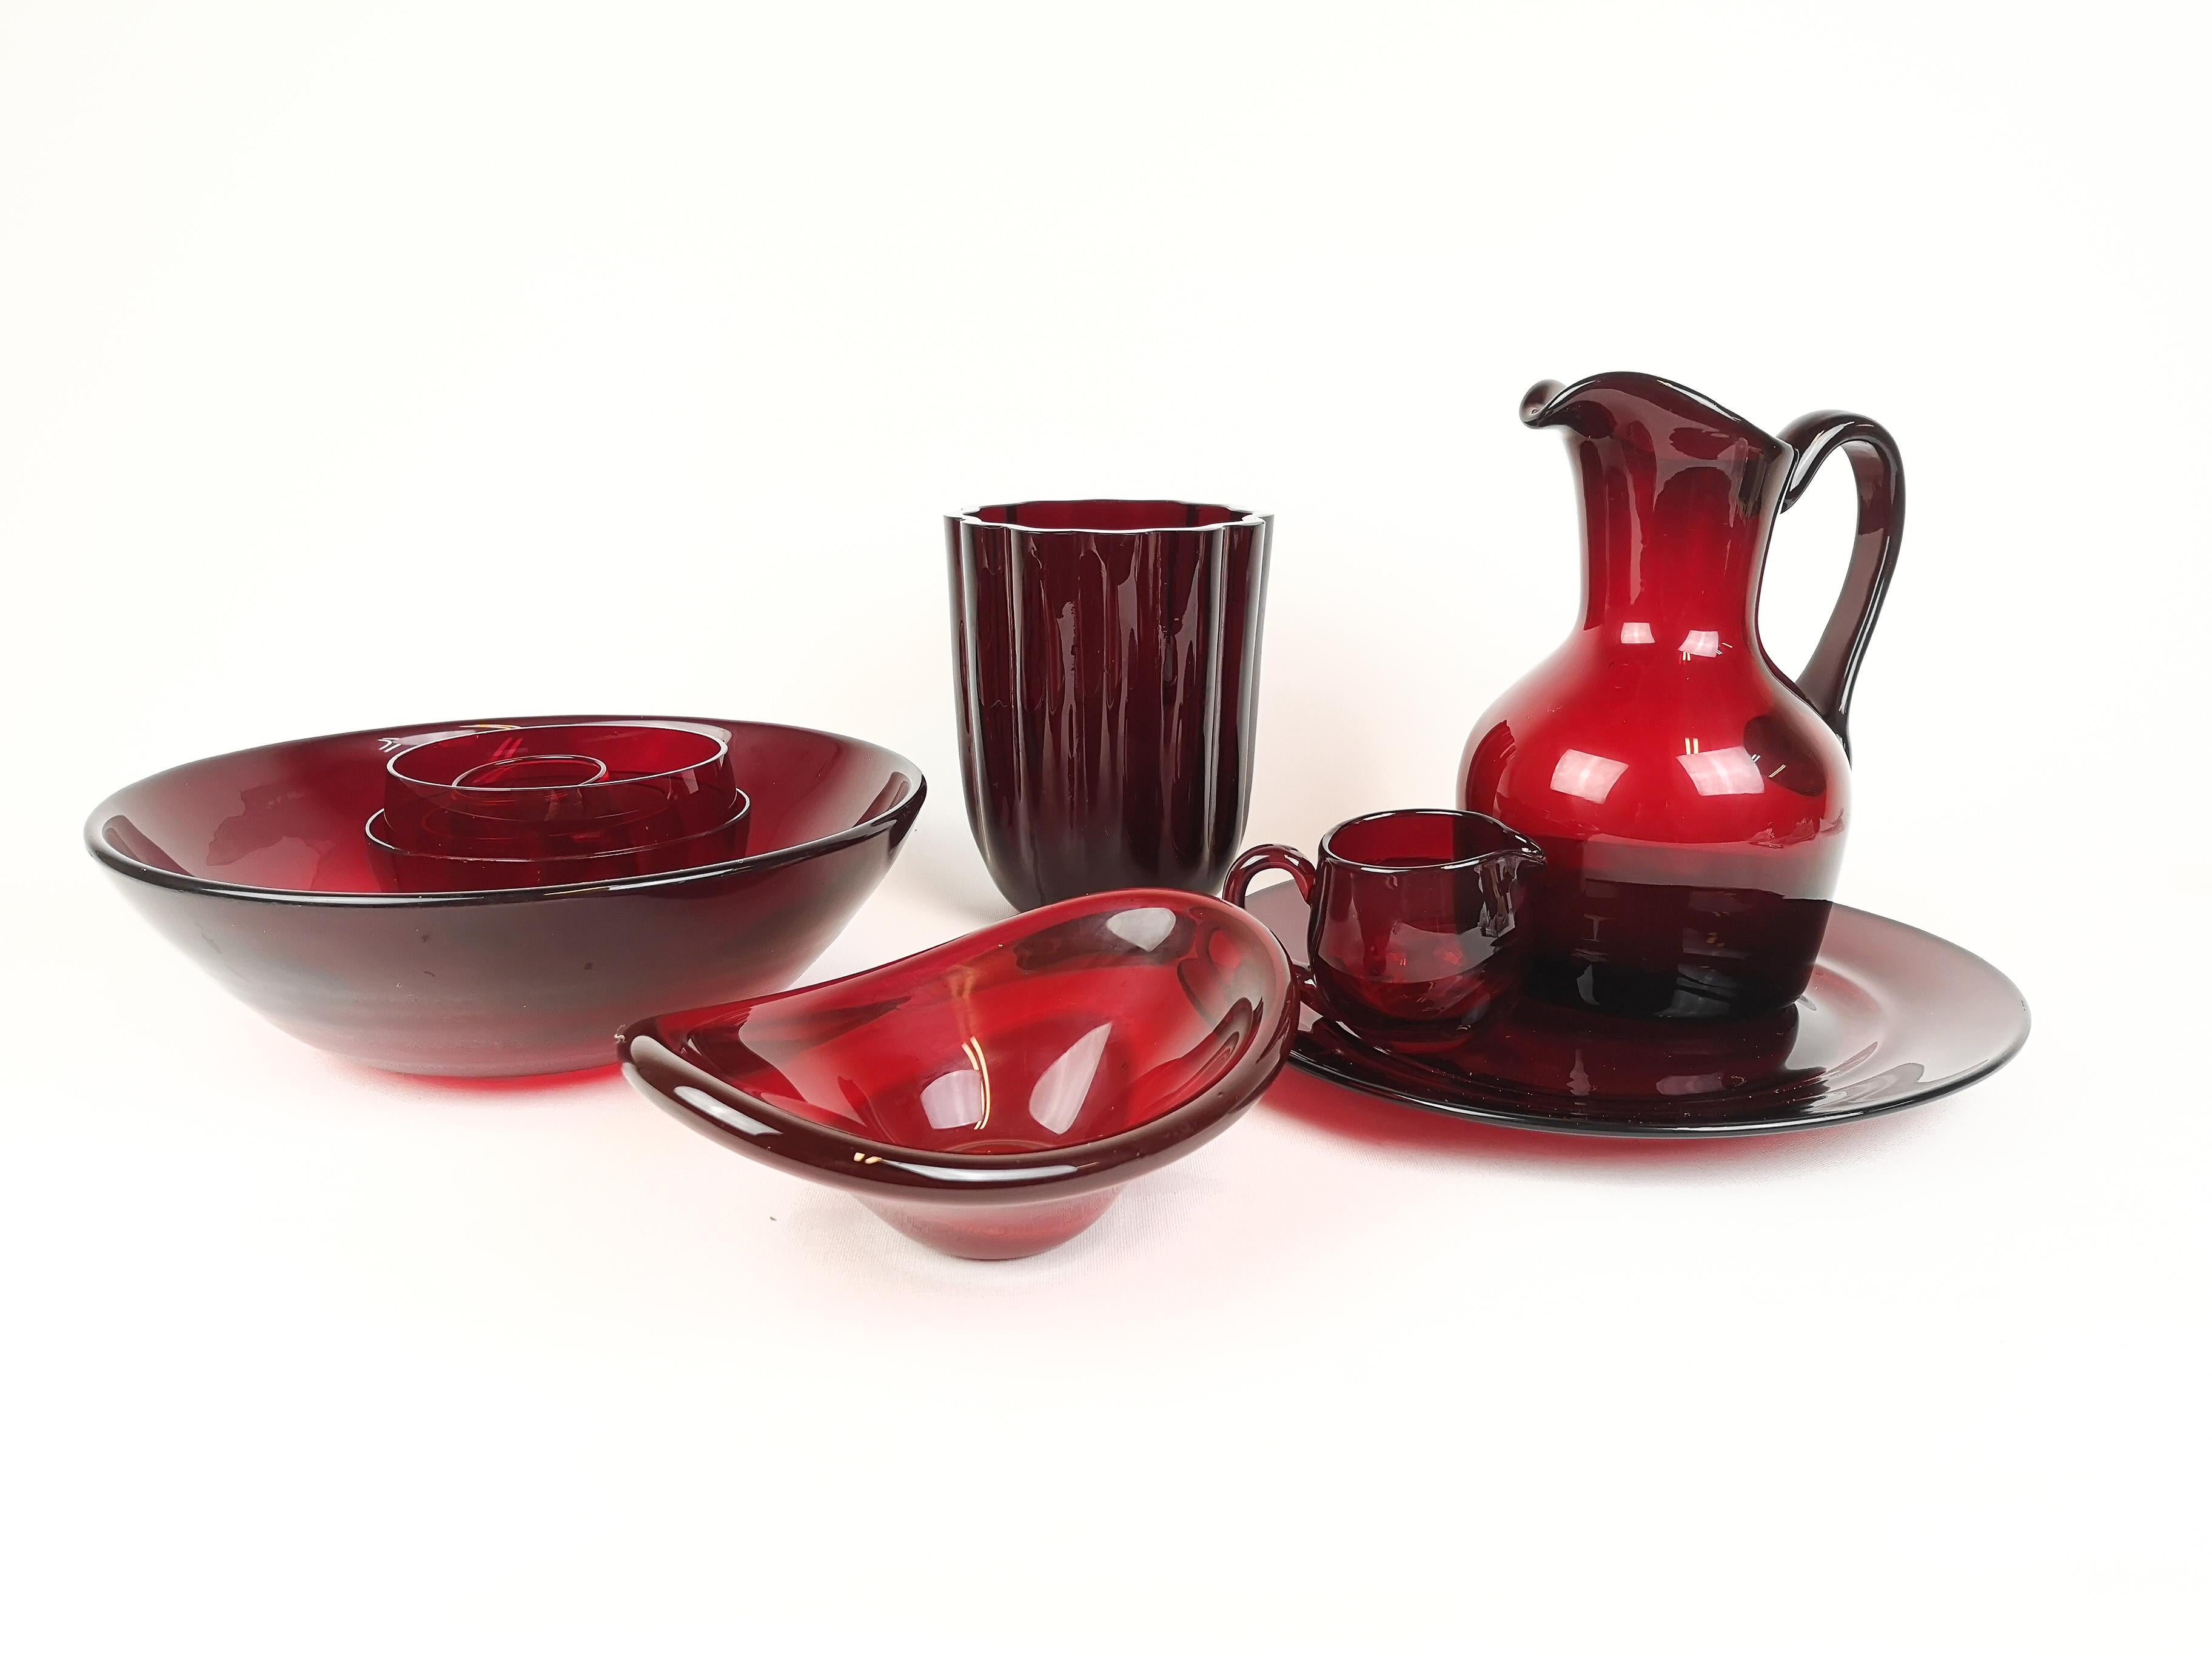 Wonderful Rubin red is these glasses made in Sweden at Reijmyre. Designed by Monica Bratt.
Overall good condition.
Measures: Plate 25 cm, jug H 19 cm, vase 15 cm, big bowl D 24, H 9 cm, small bowl 19 x 14 x 6 cm.
 